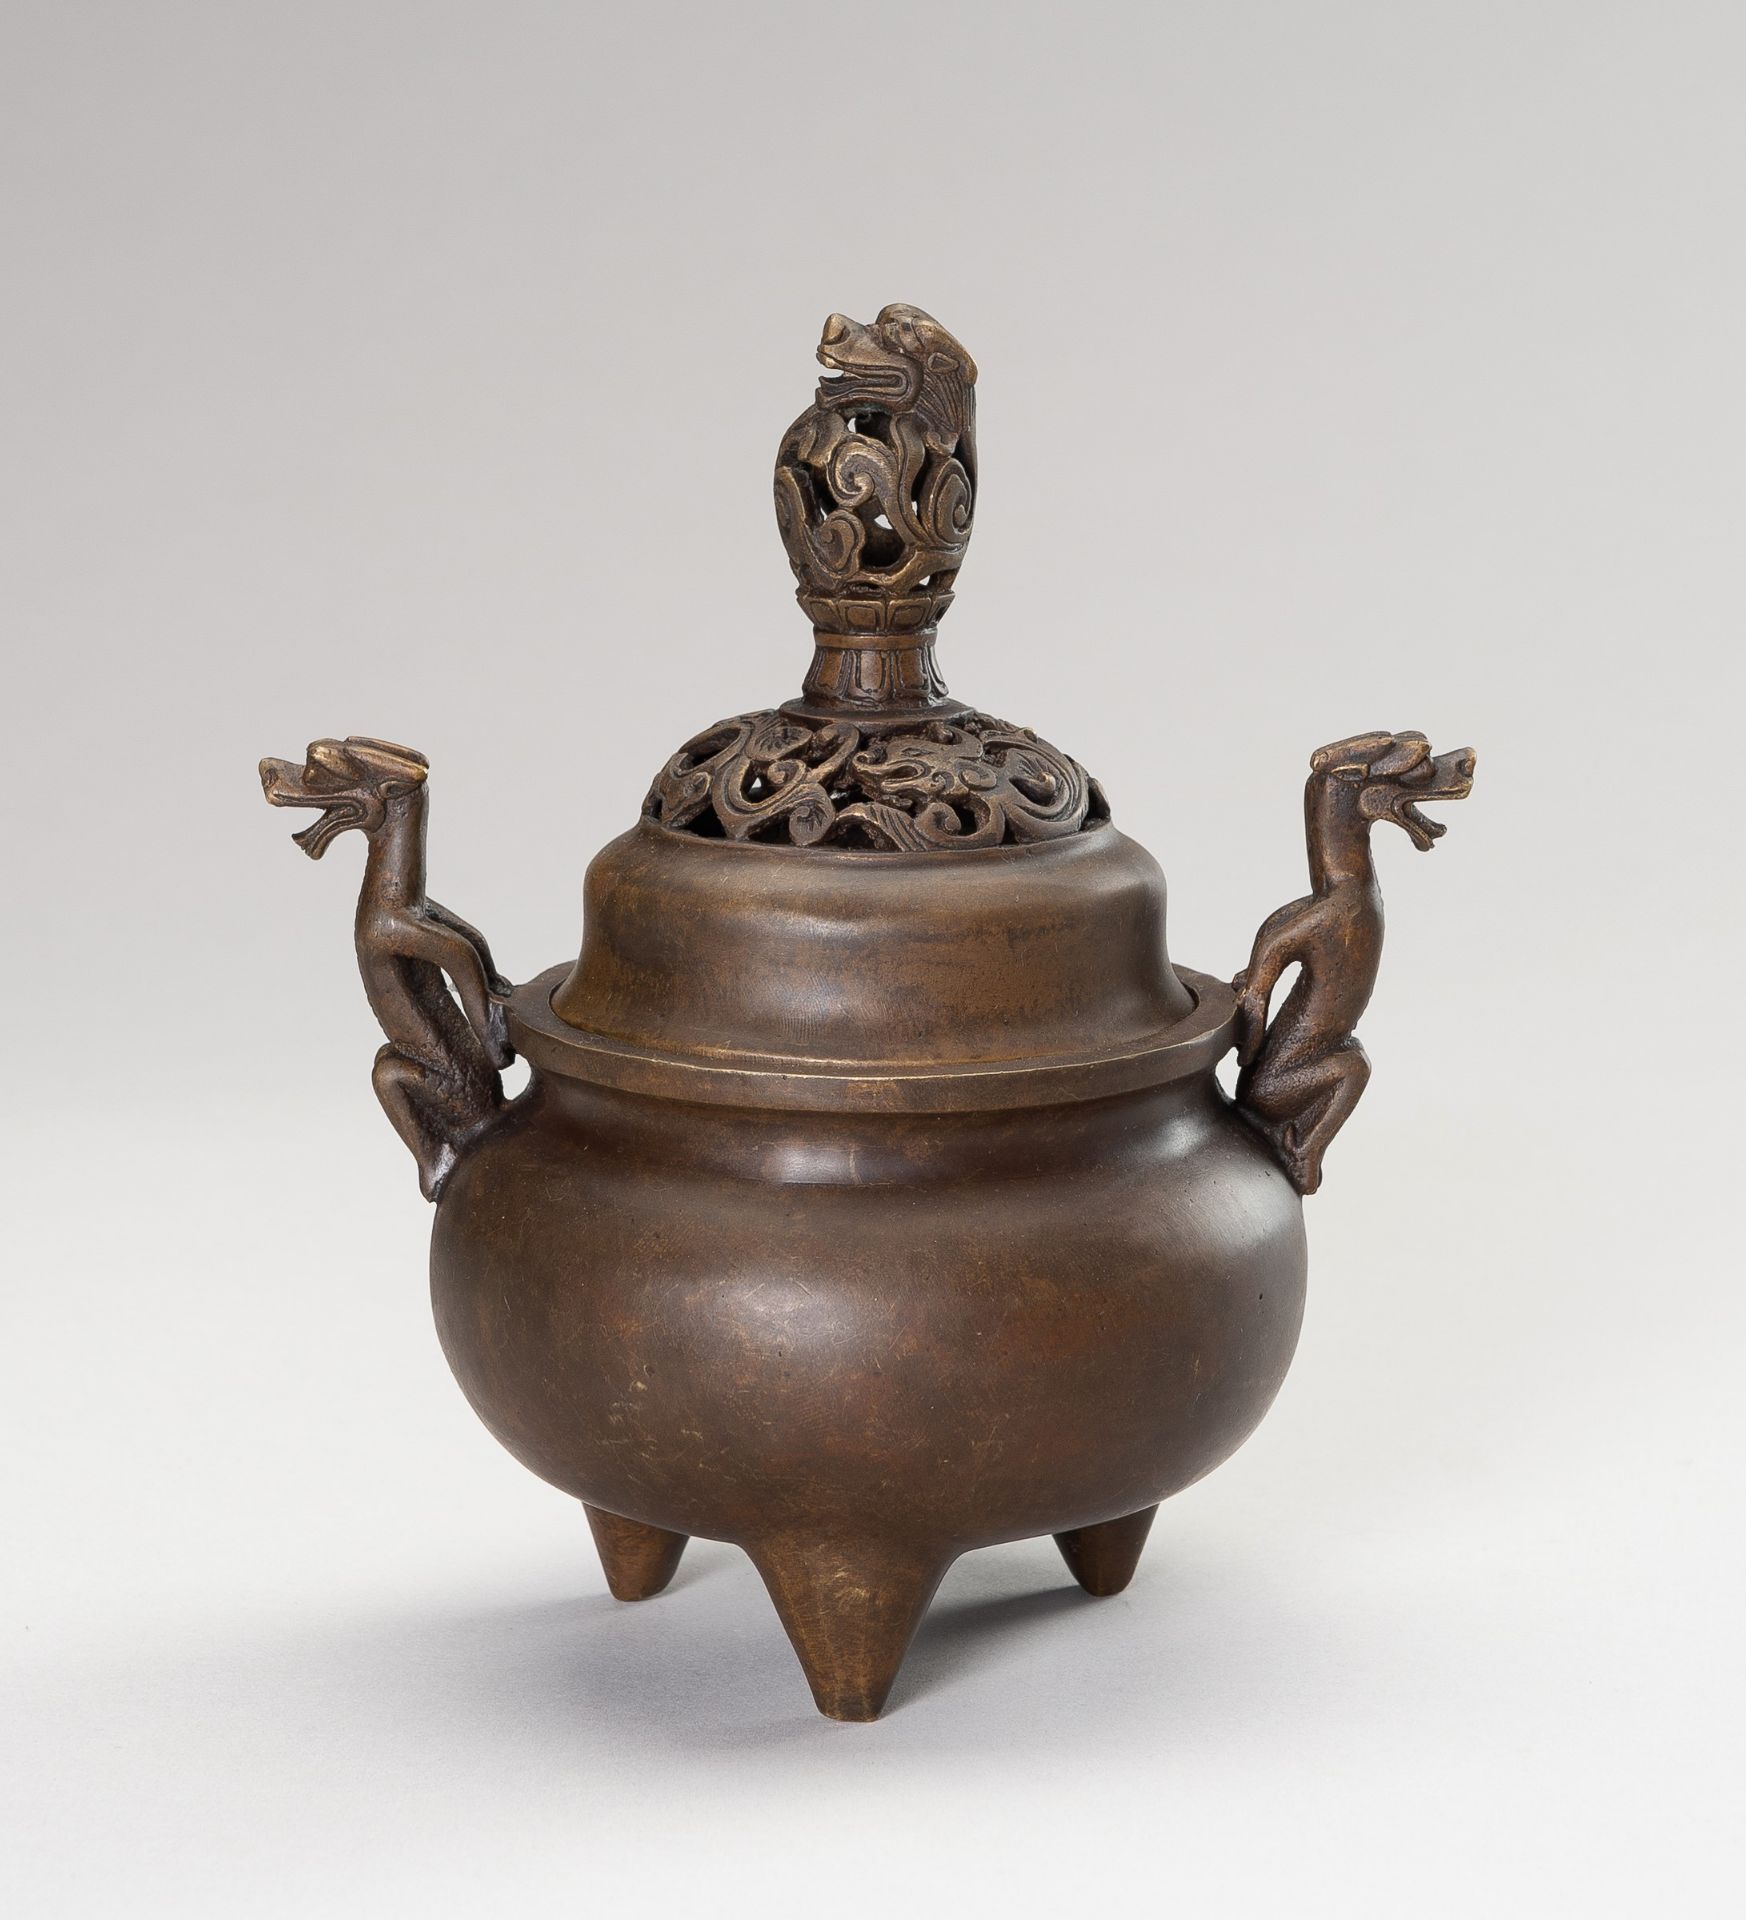 A BRONZE TRIPOD CENSER WITH DRAGONS